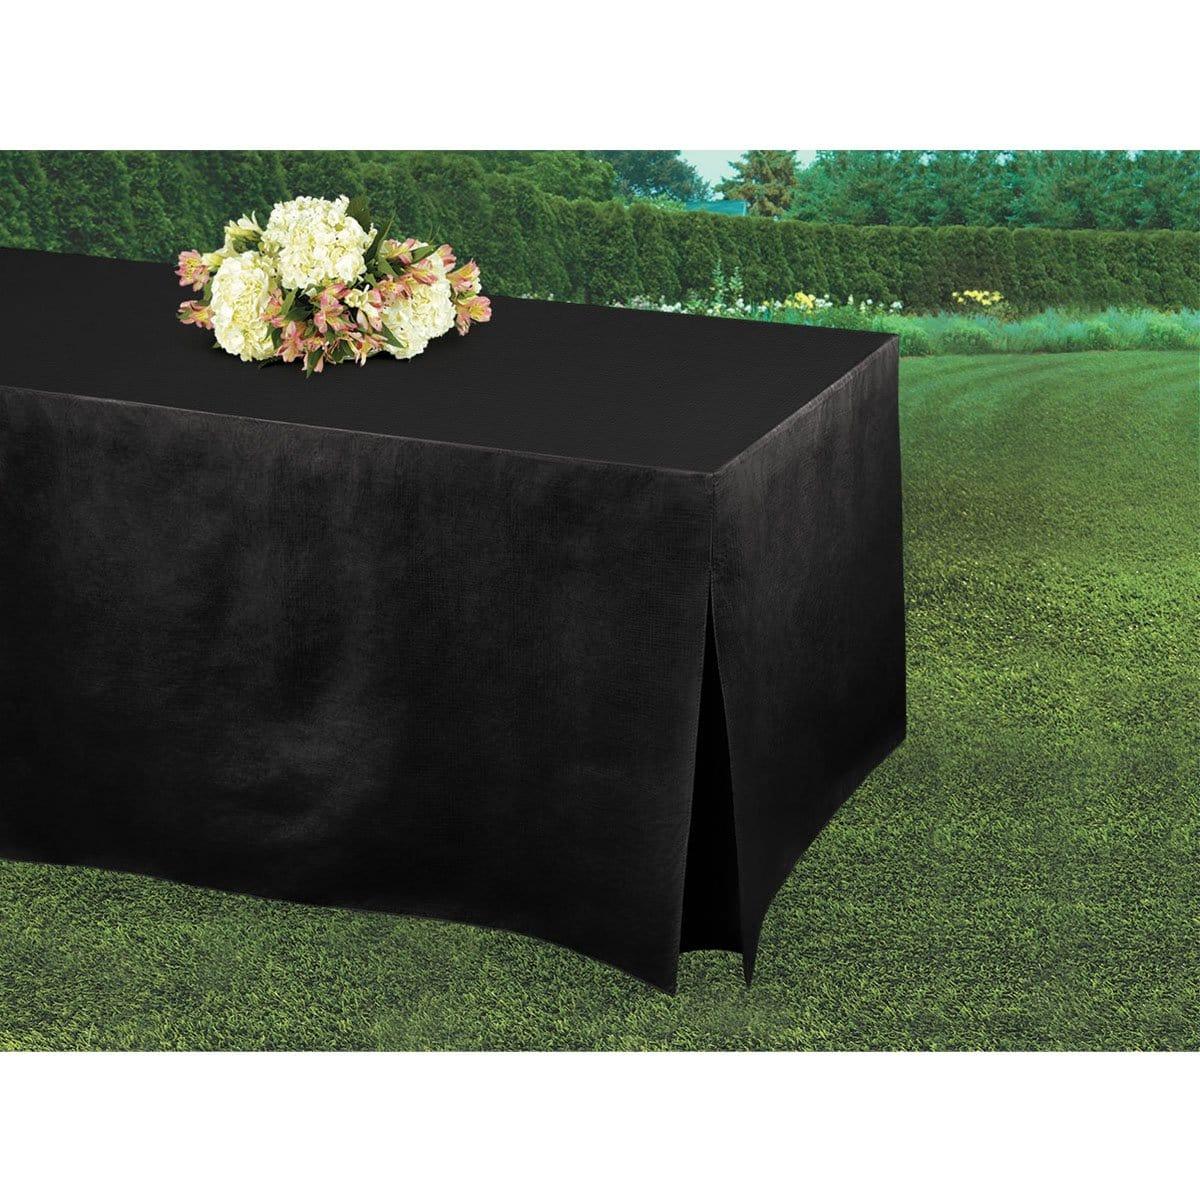 Buy Plasticware Fitters Table Covers 72 X 31 X 27 In. - Black sold at Party Expert